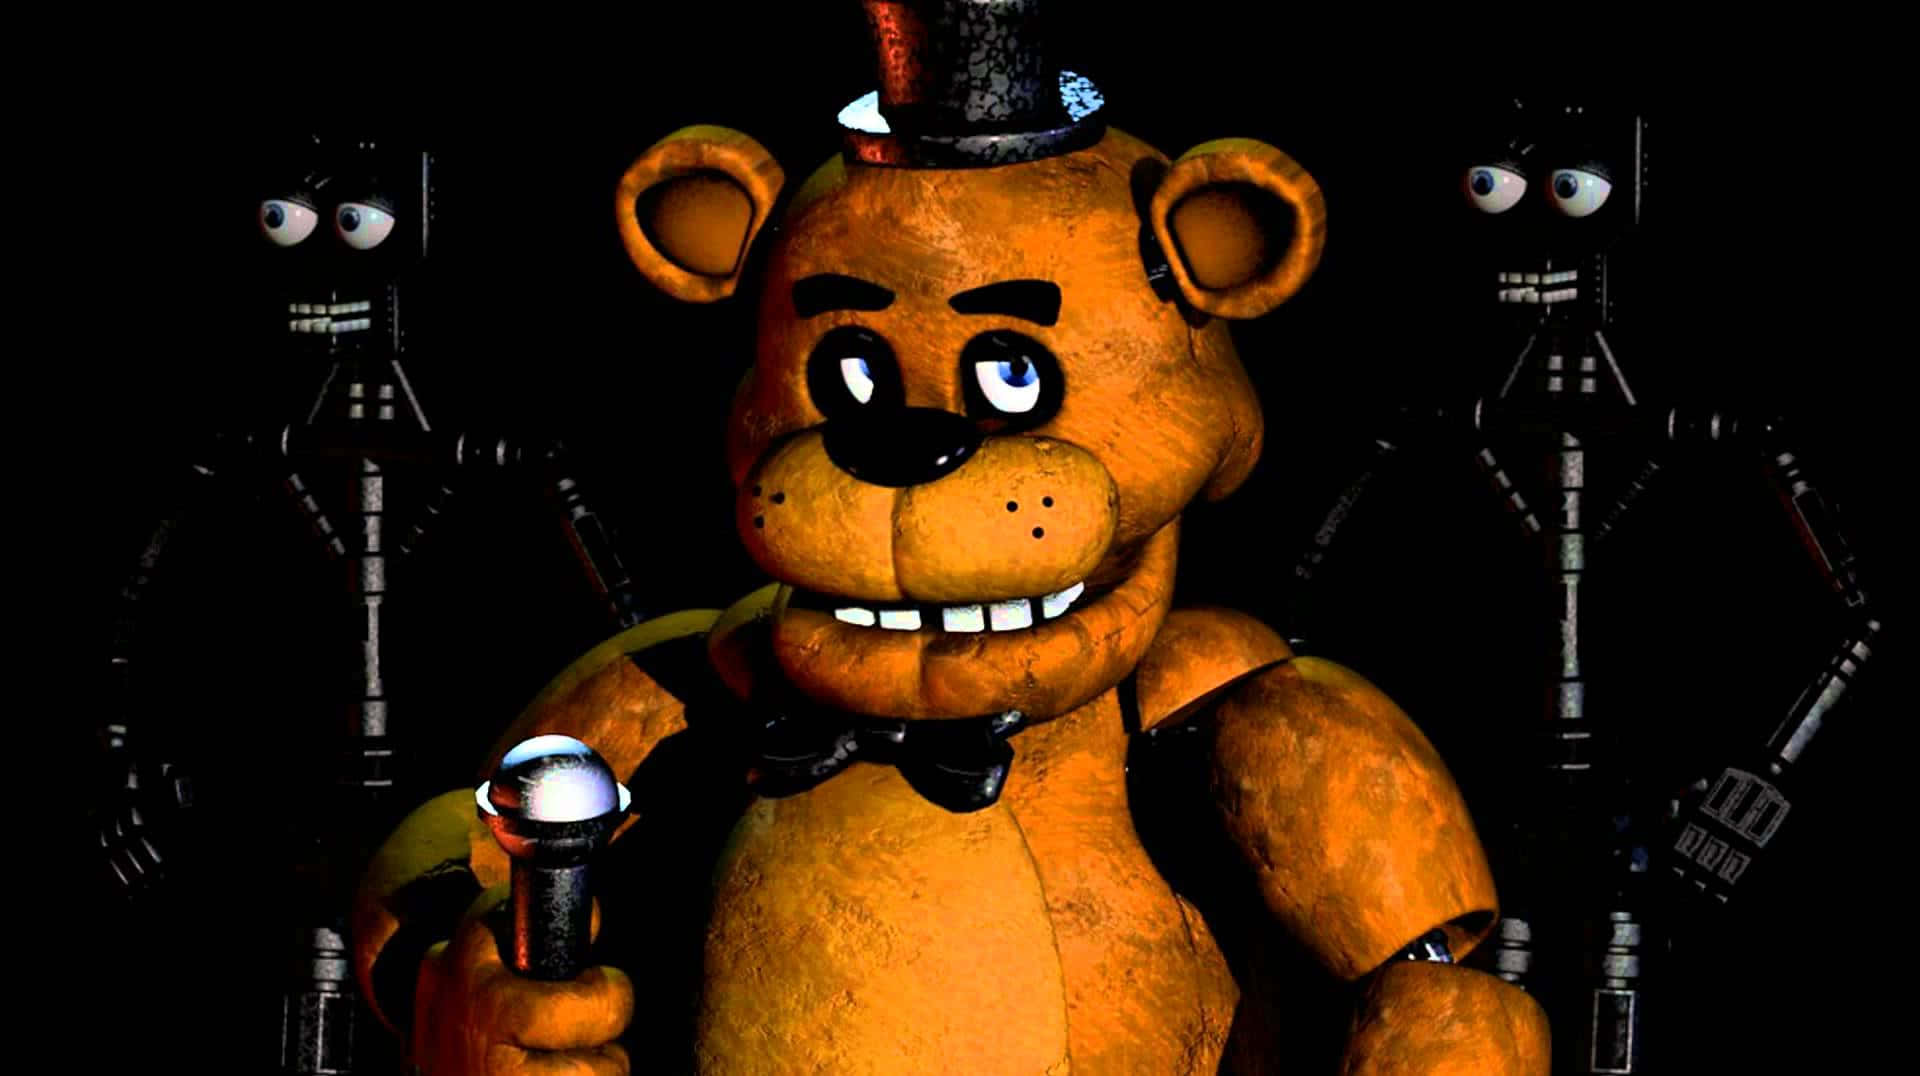 Step right up and join in on the fun at Freddy Fazbear's family pizzeria!